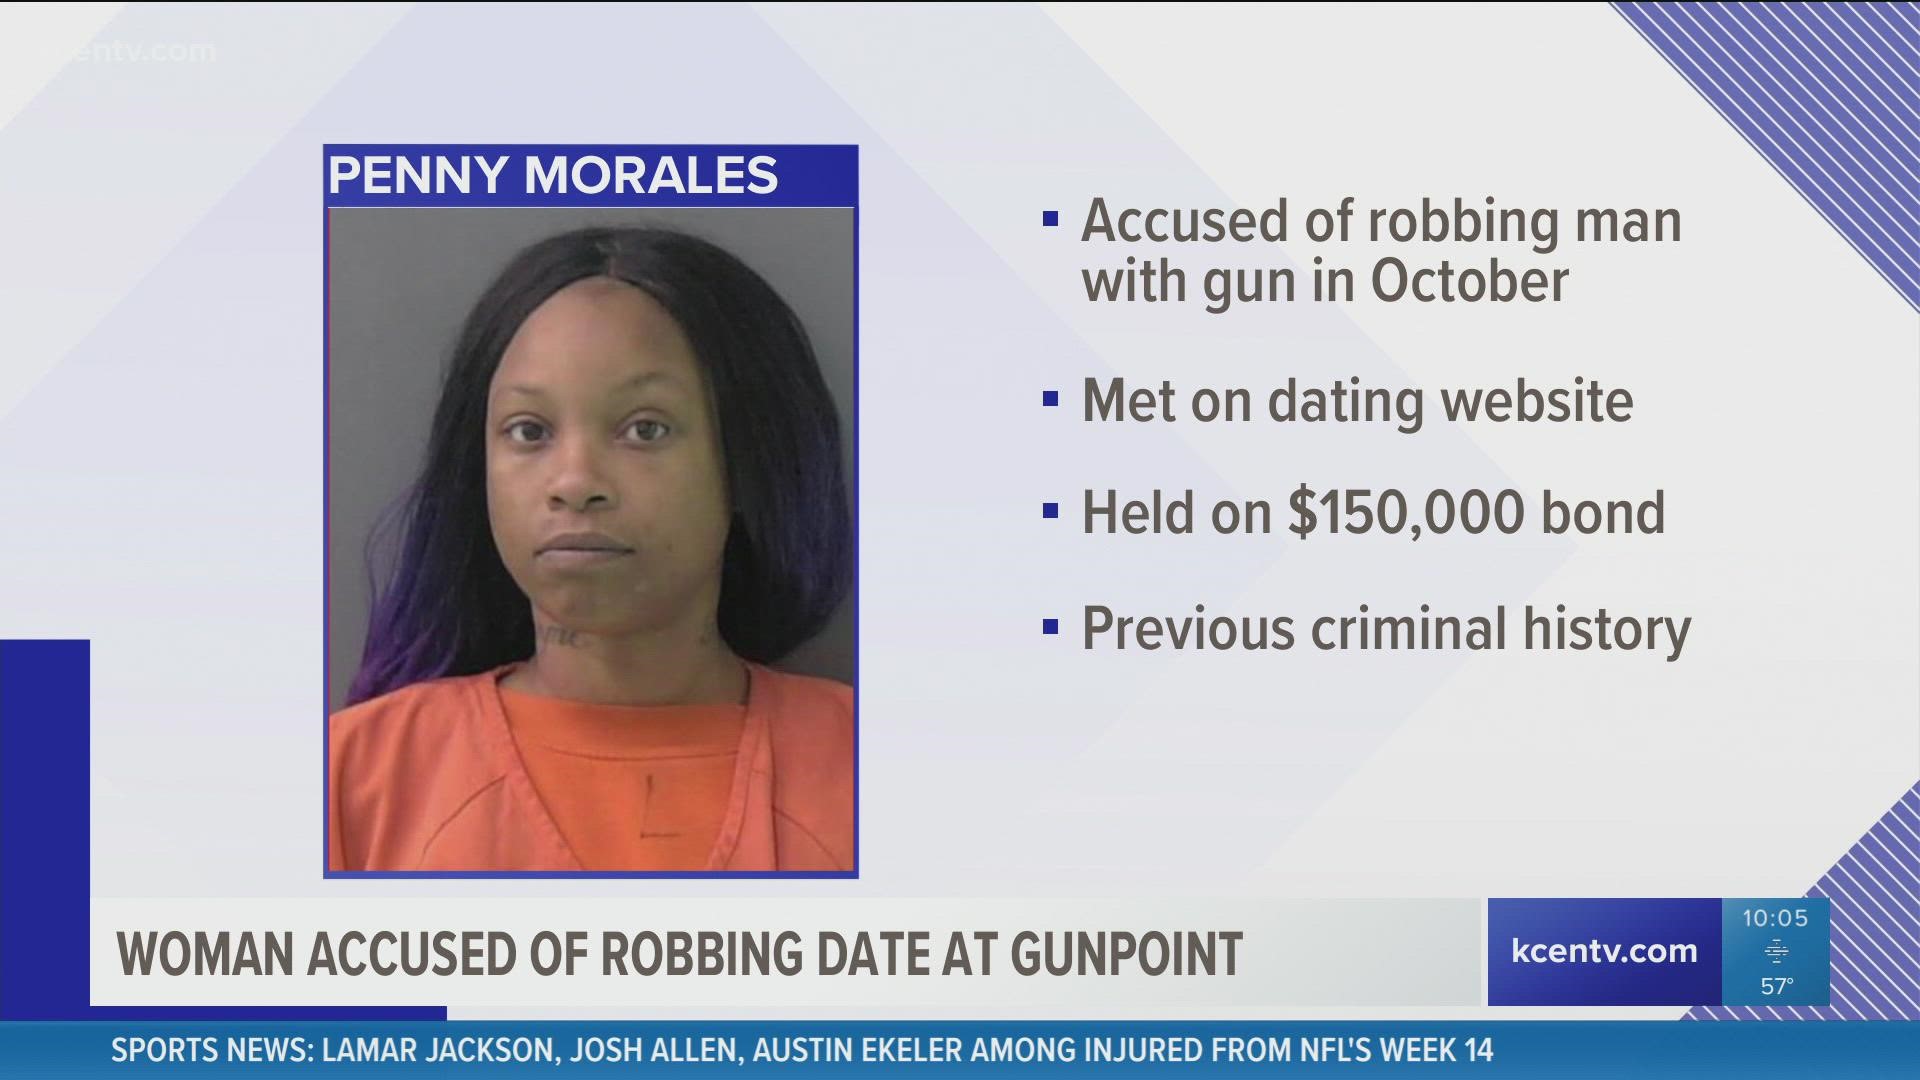 Penny Morales reportedly robbed her date by gunpoint after he invited her to his place back in October. The two met on a dating site, police said.